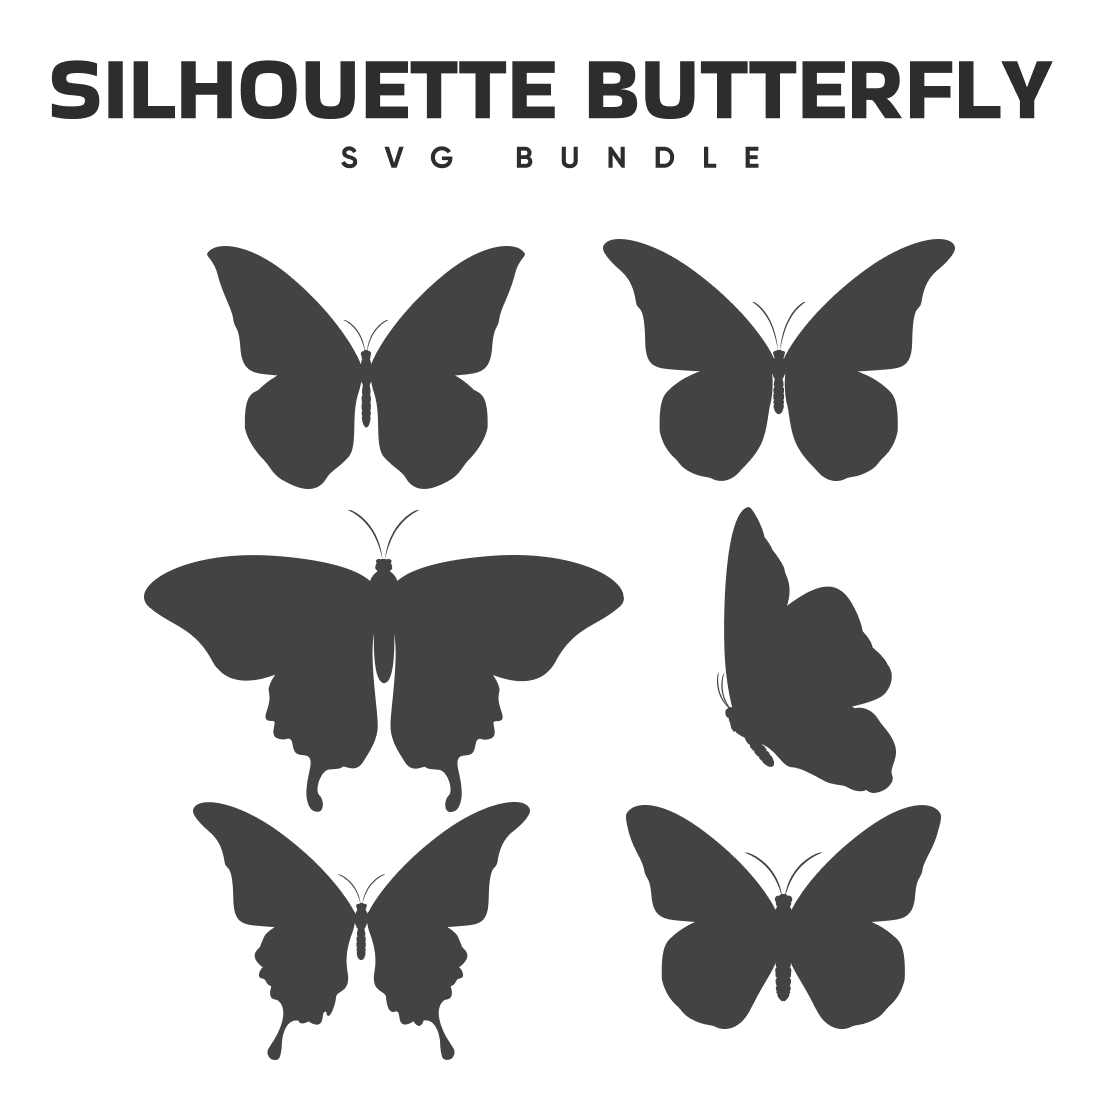 The silhouettes of butterflies are shown in black and white.